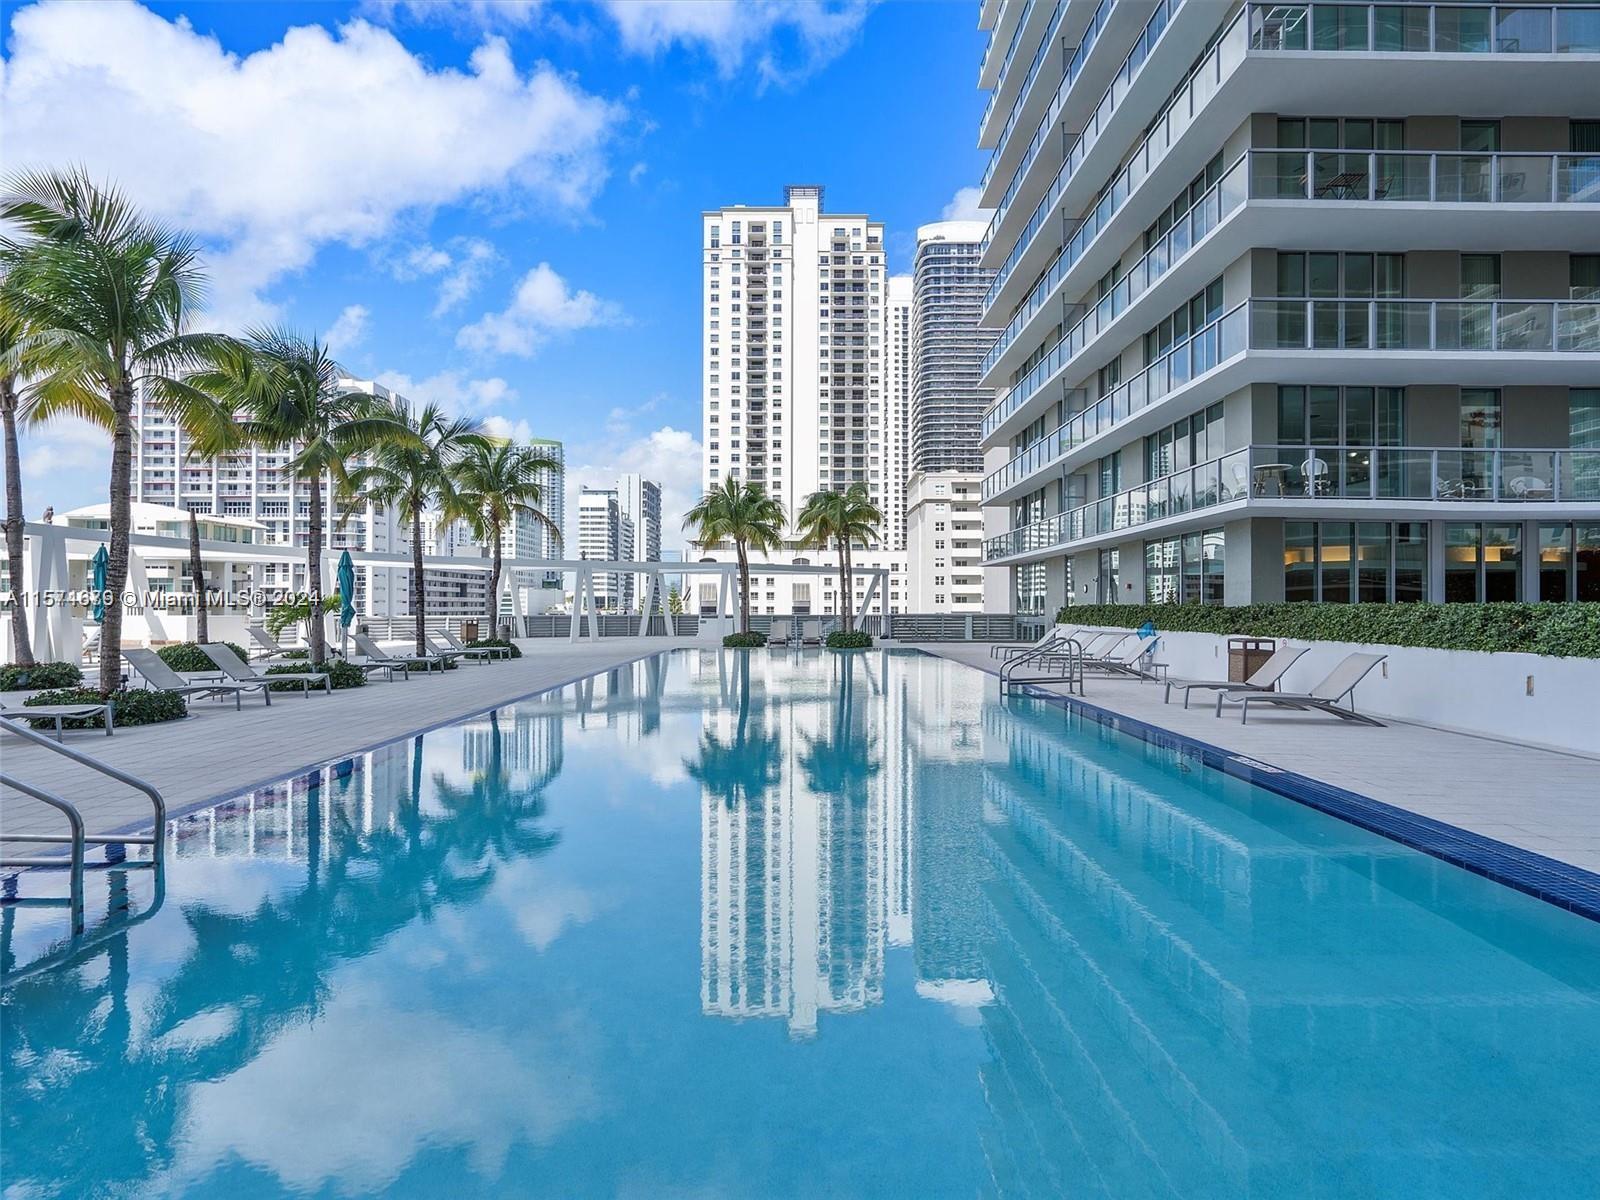 BEAUTIFUL FURNISHED 1/1 UNIT. AMAZING VIEWS! IN THE HEART OF BRICKELL. AMAIZING AMENITIES, 24/7 SECURITY, SHORT DISTANCE TO SHOPS, RESTAURANTS, FINANCIAL DISTRIC, BRICKELL CITY CENTRE AND MORE. CLOSE TO TRANSPORTATION.